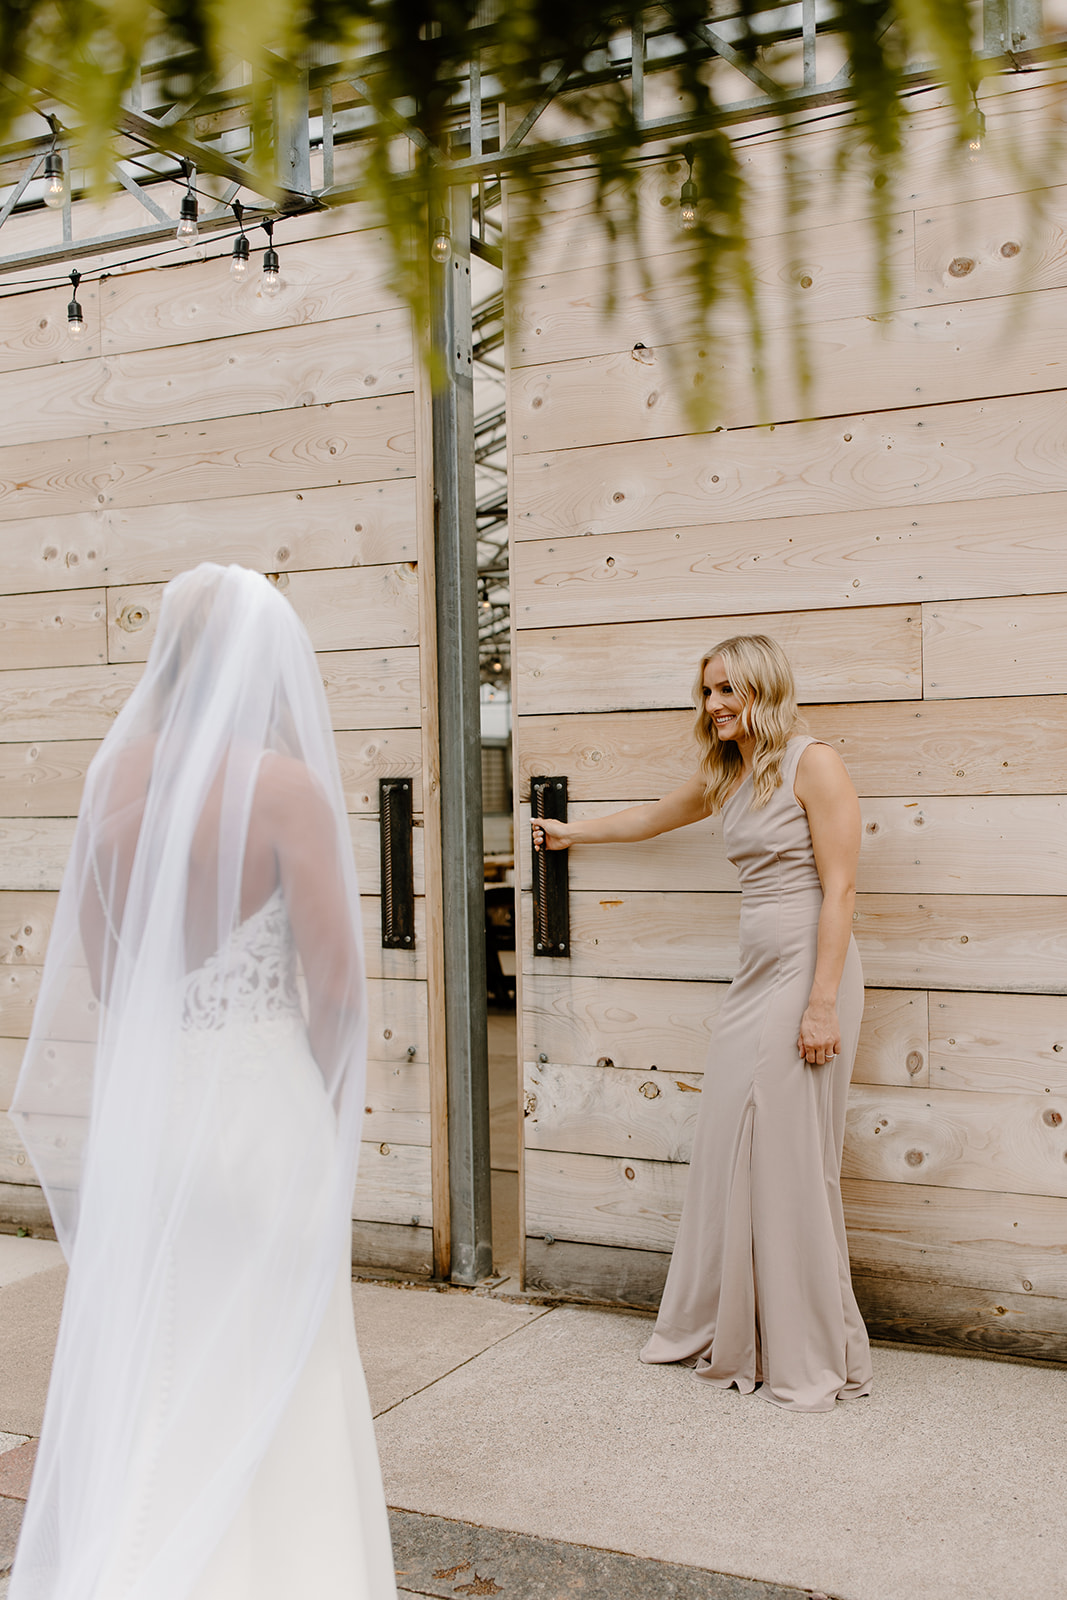 Maid of honor opens the door for her sister to see her groom